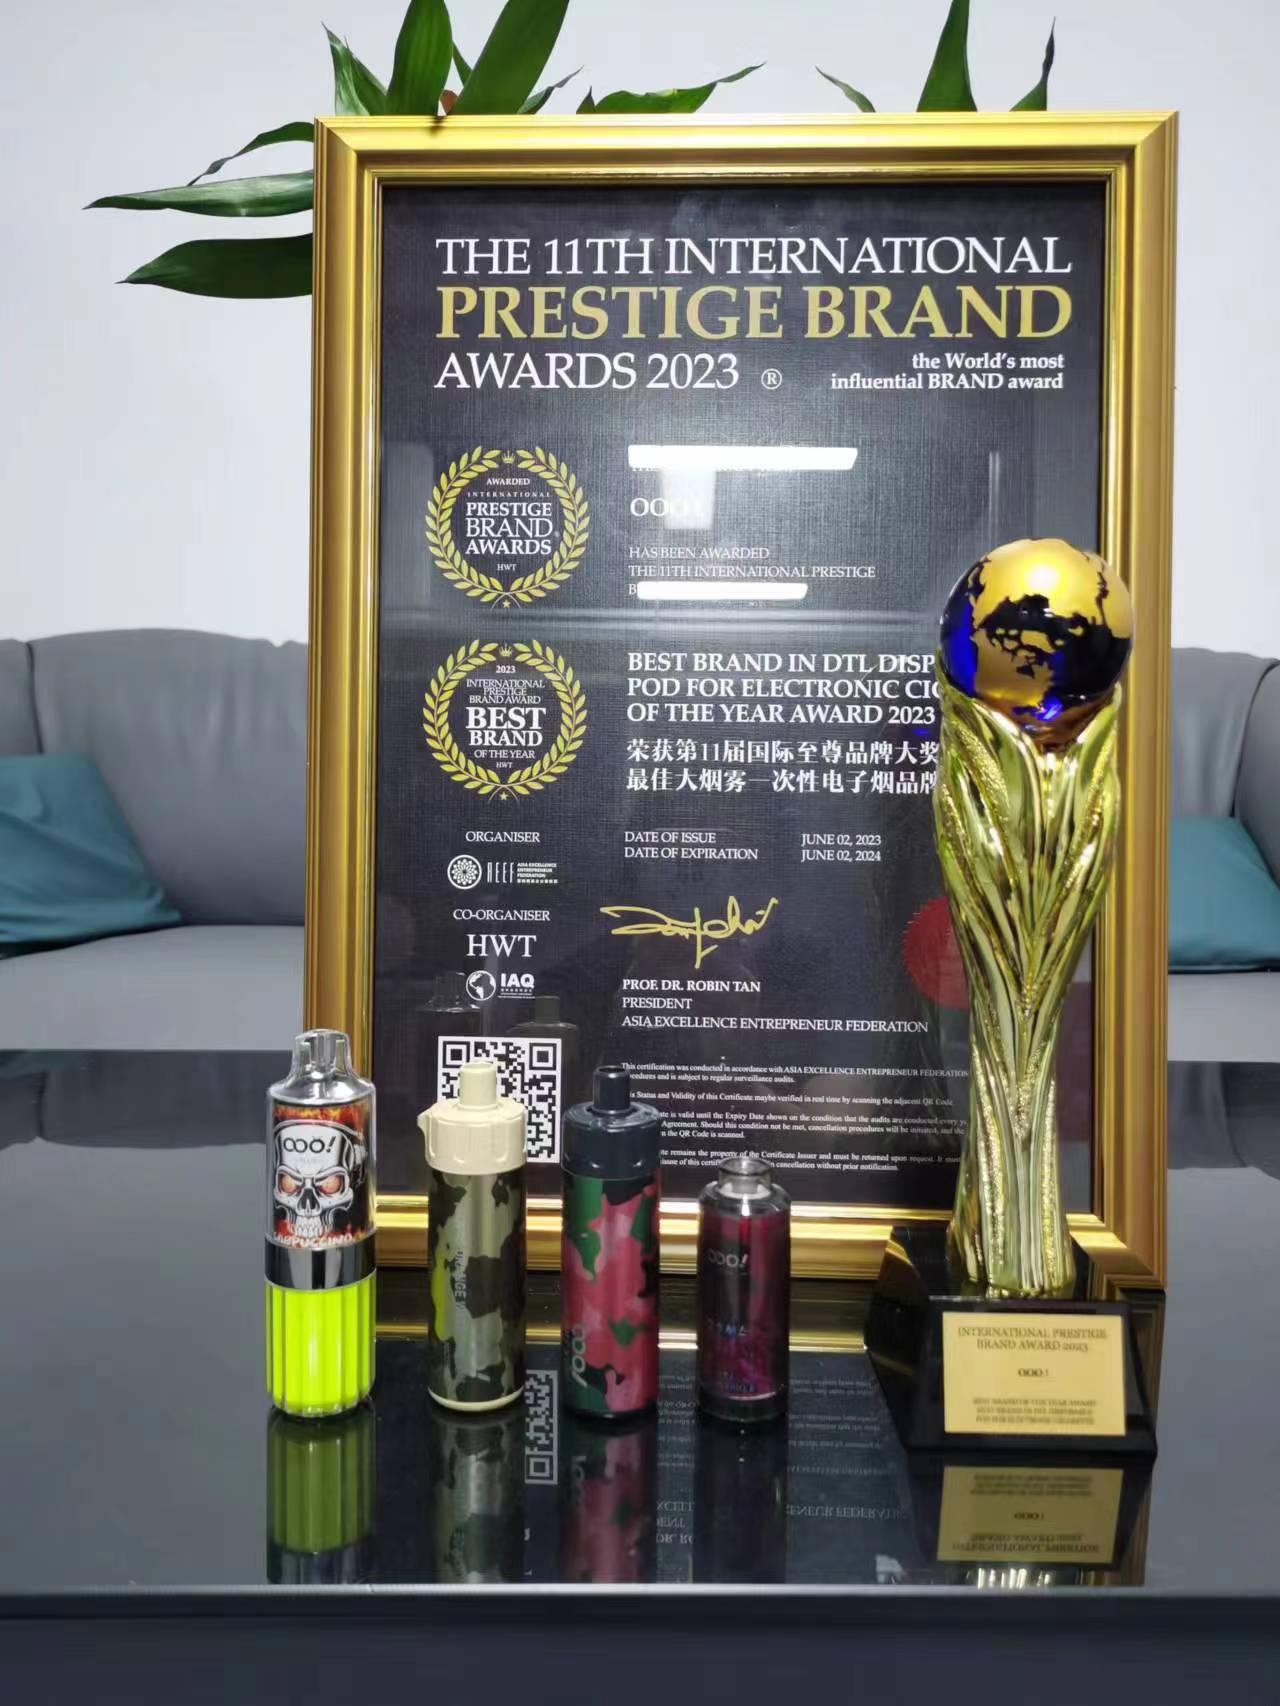 OOO! Won the Best Brand in DTL Disposable POD for Electronic Cigarette of the Year Award on the 11th International Prestige Brand Awards DL Vape 2023